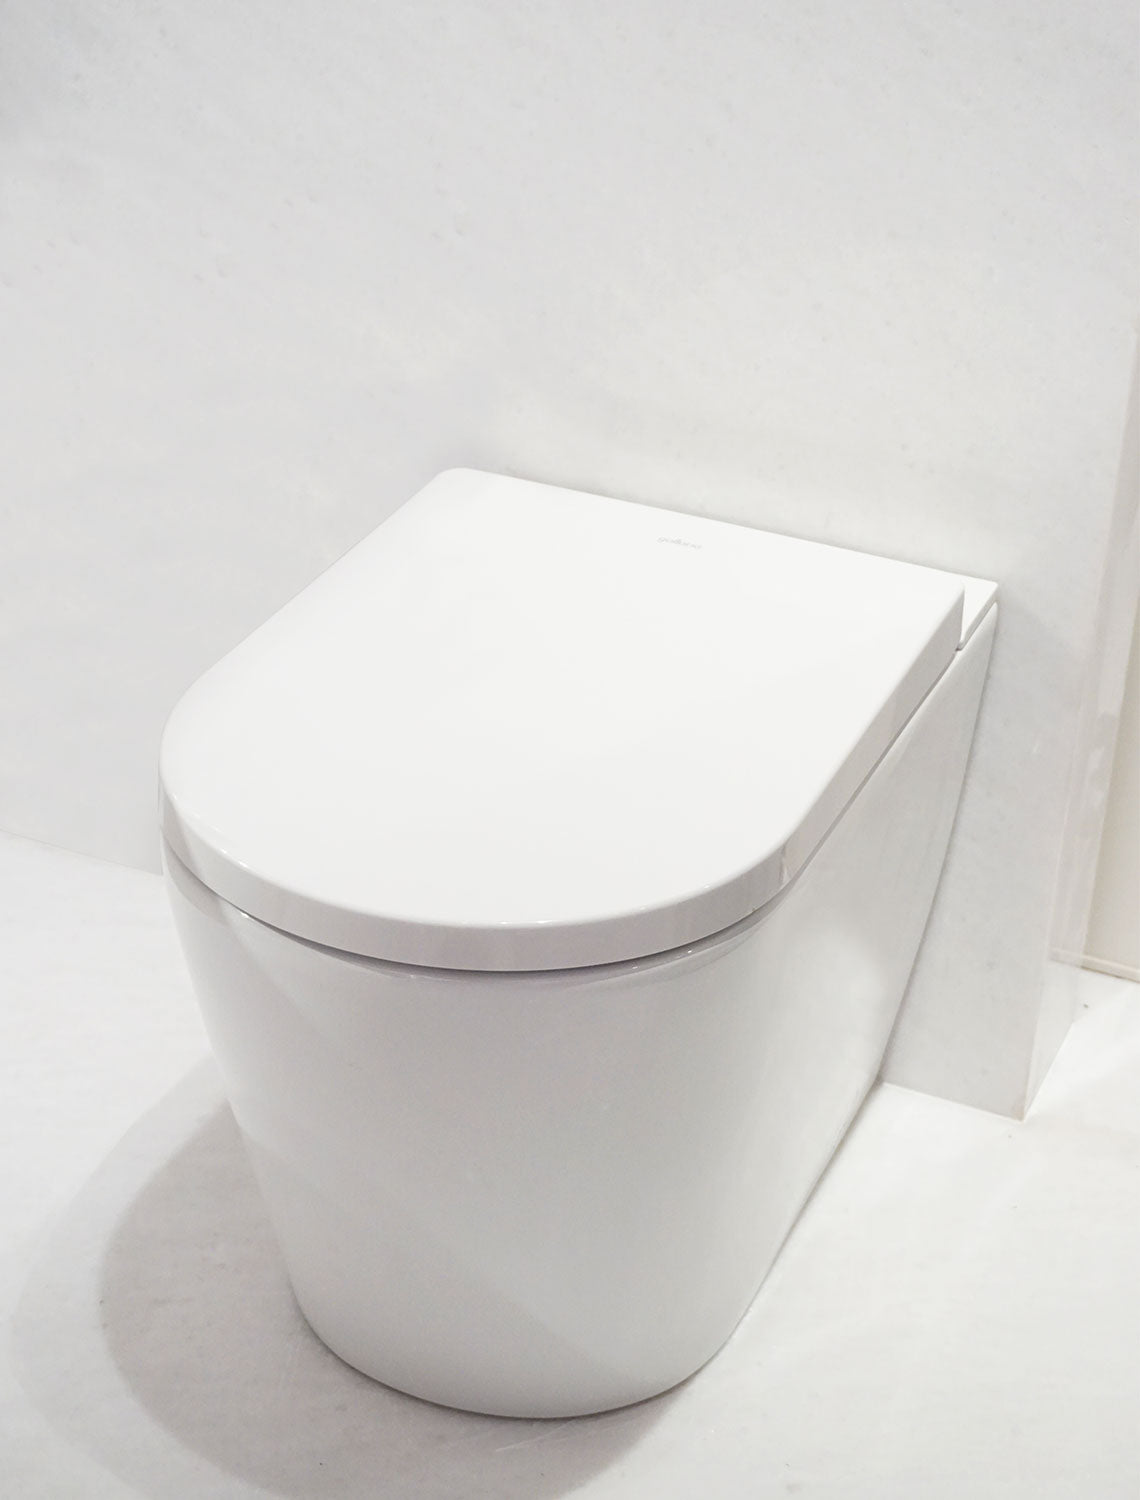 GALLARIA EVO COMFORT RIMLESS WALL FACE PAN AND REMOTE WASHLET PACKAGE GLOSS WHITE